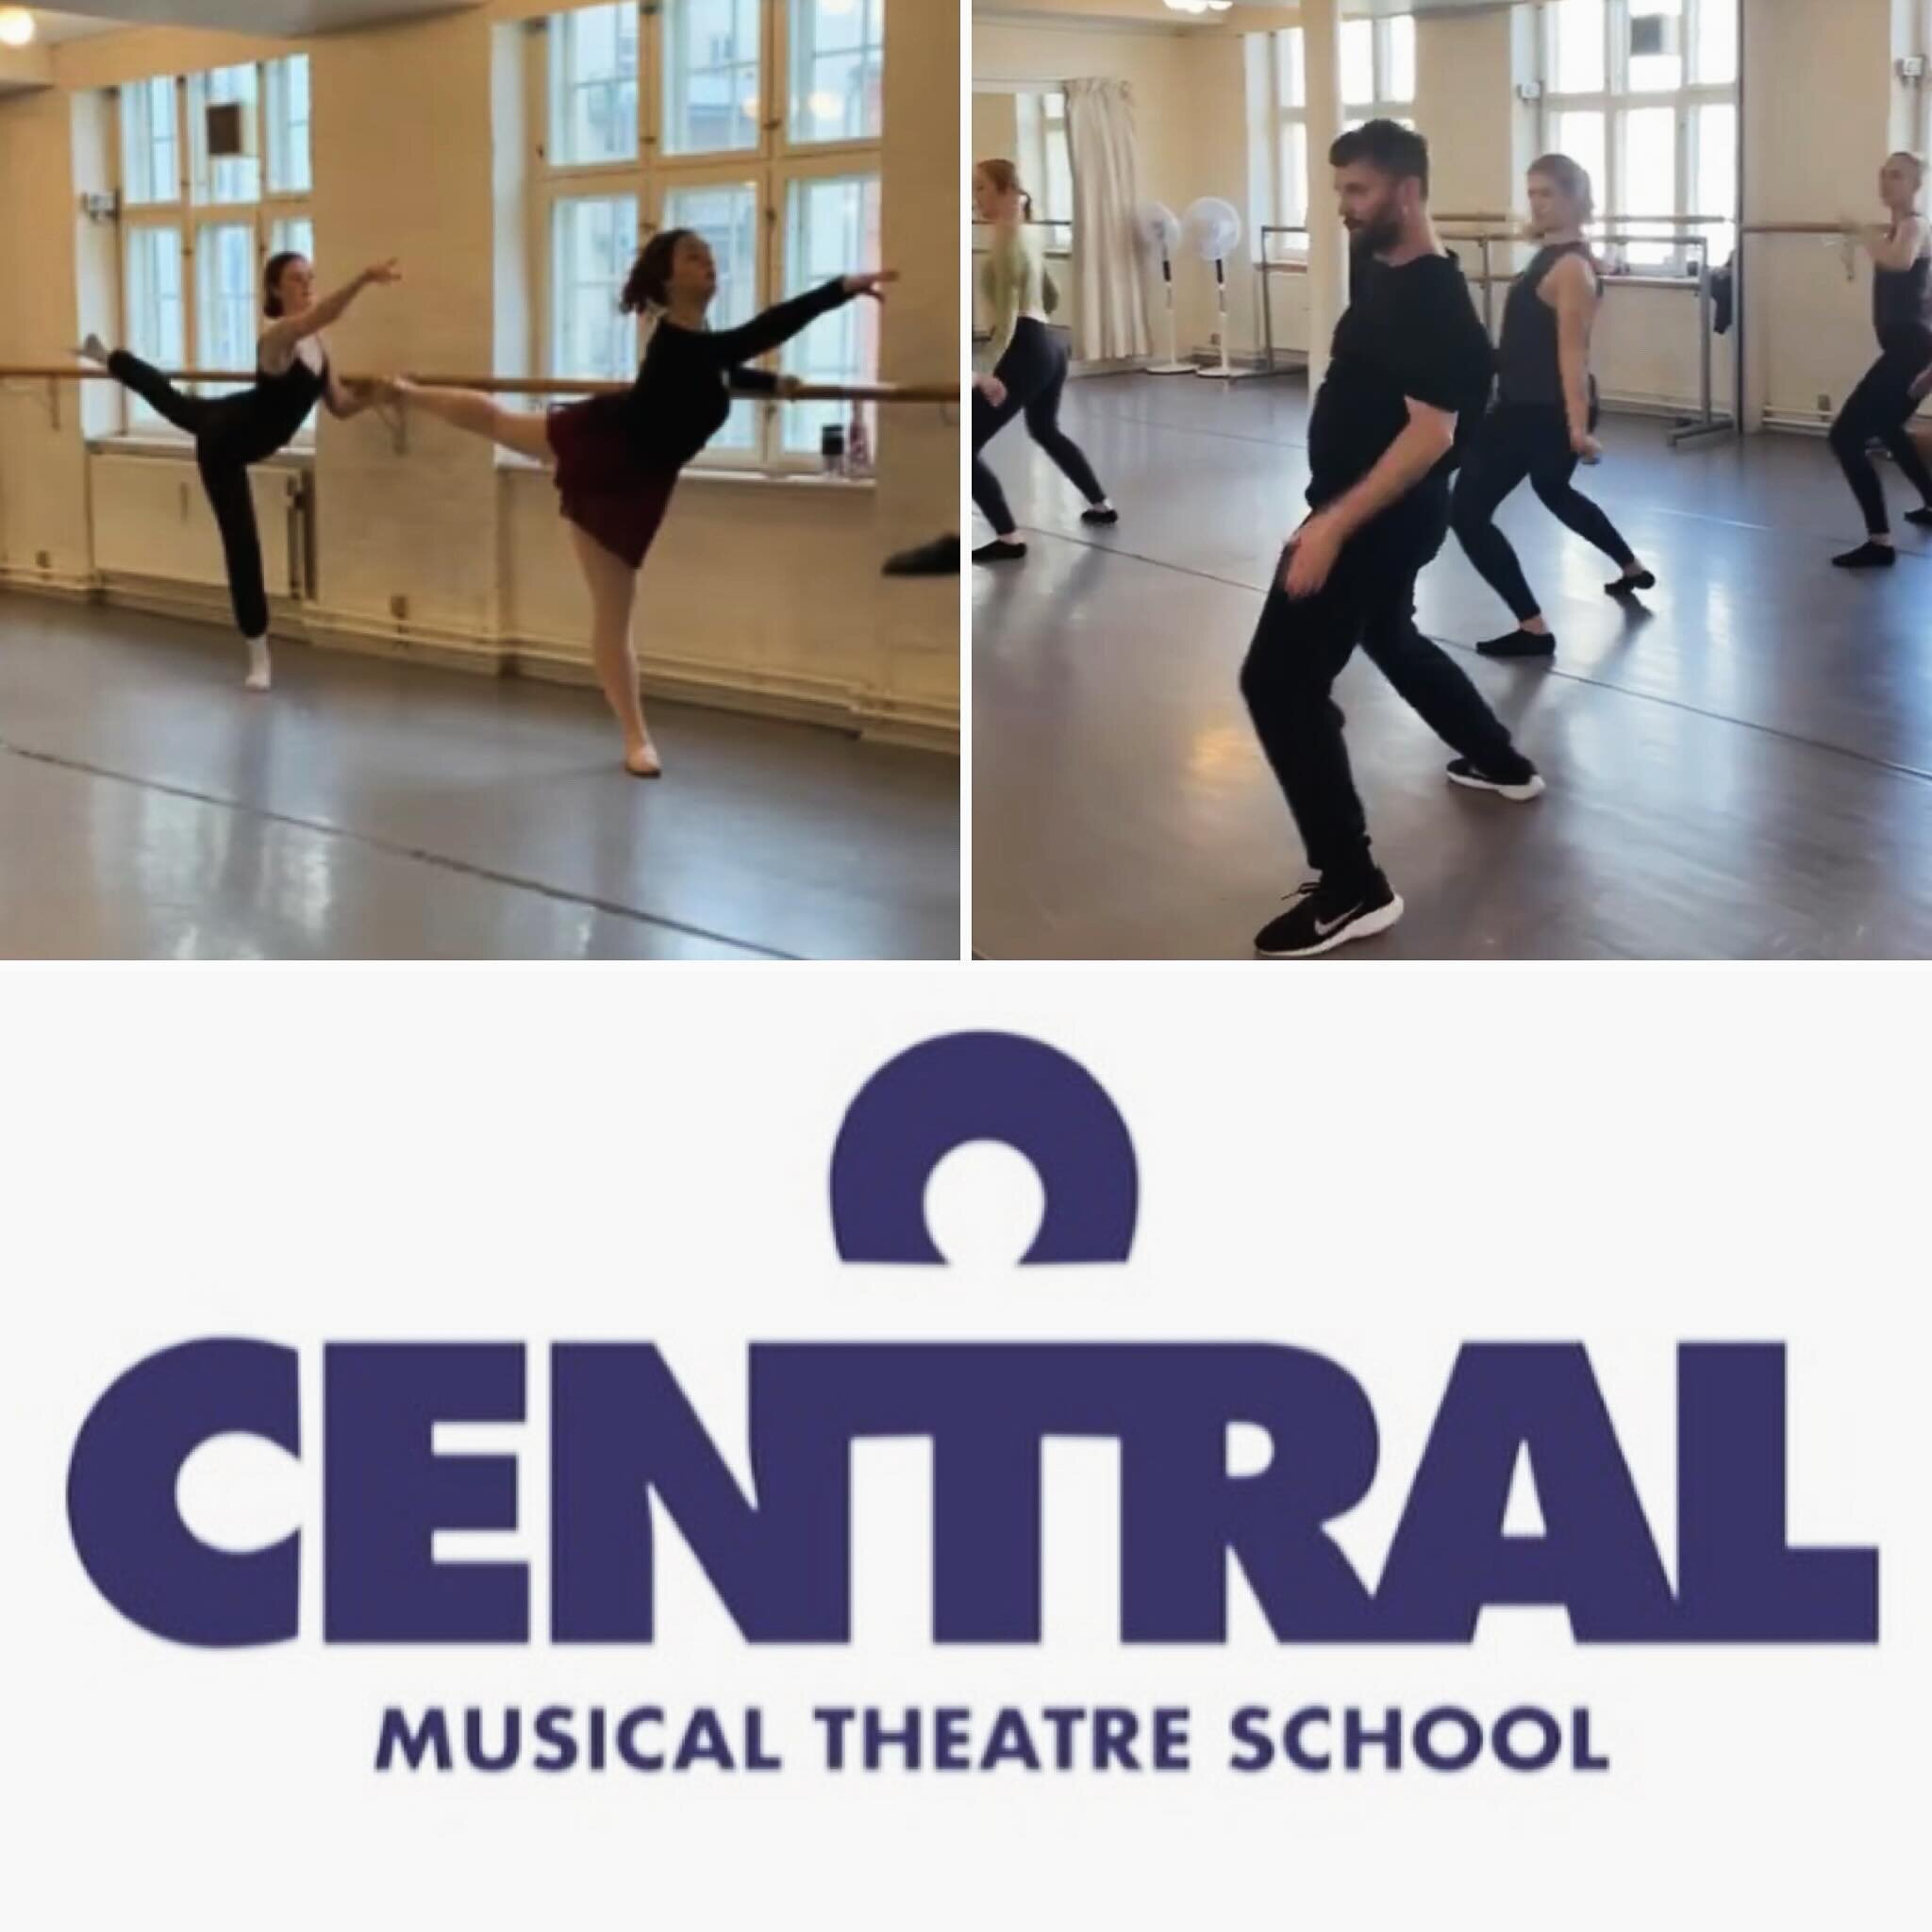 Drop in Classes This Week At Central !

Thursday 14th March 
Ballet with Hayley Franks H&oslash;ier
9.00 - 10.30
100 kr per class

Friday 15th March 
Jazz with Steffen Huleh&oslash;j Frederiksen 
13.00 - 14.30
100 kr per class

#dropinclass #ballet #